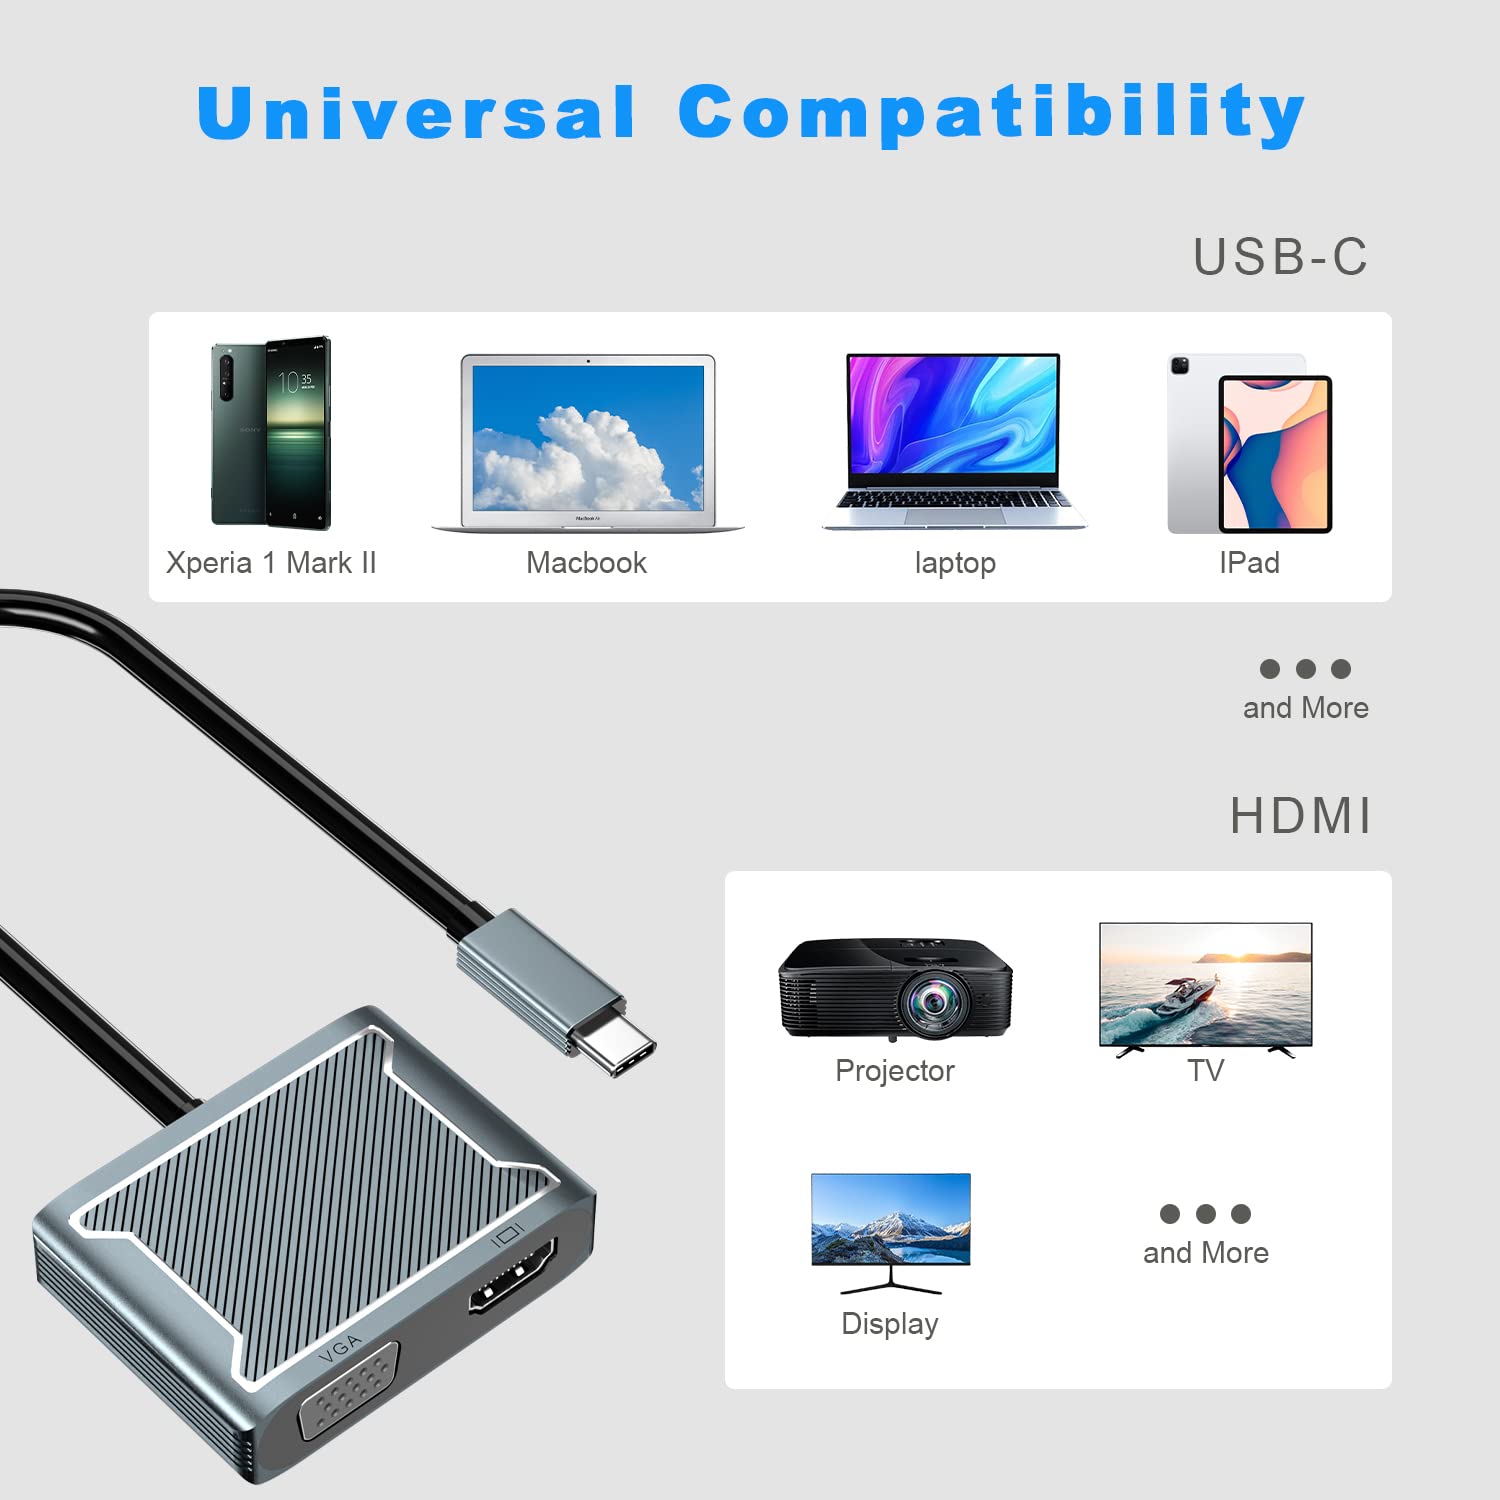 USB C to HDMI VGA Adapter, Thunderbolt 3 Type C to HDMI Splitter Converter, Compatible with MacBook Pro Air, iPad Pro, Dell XPS and More